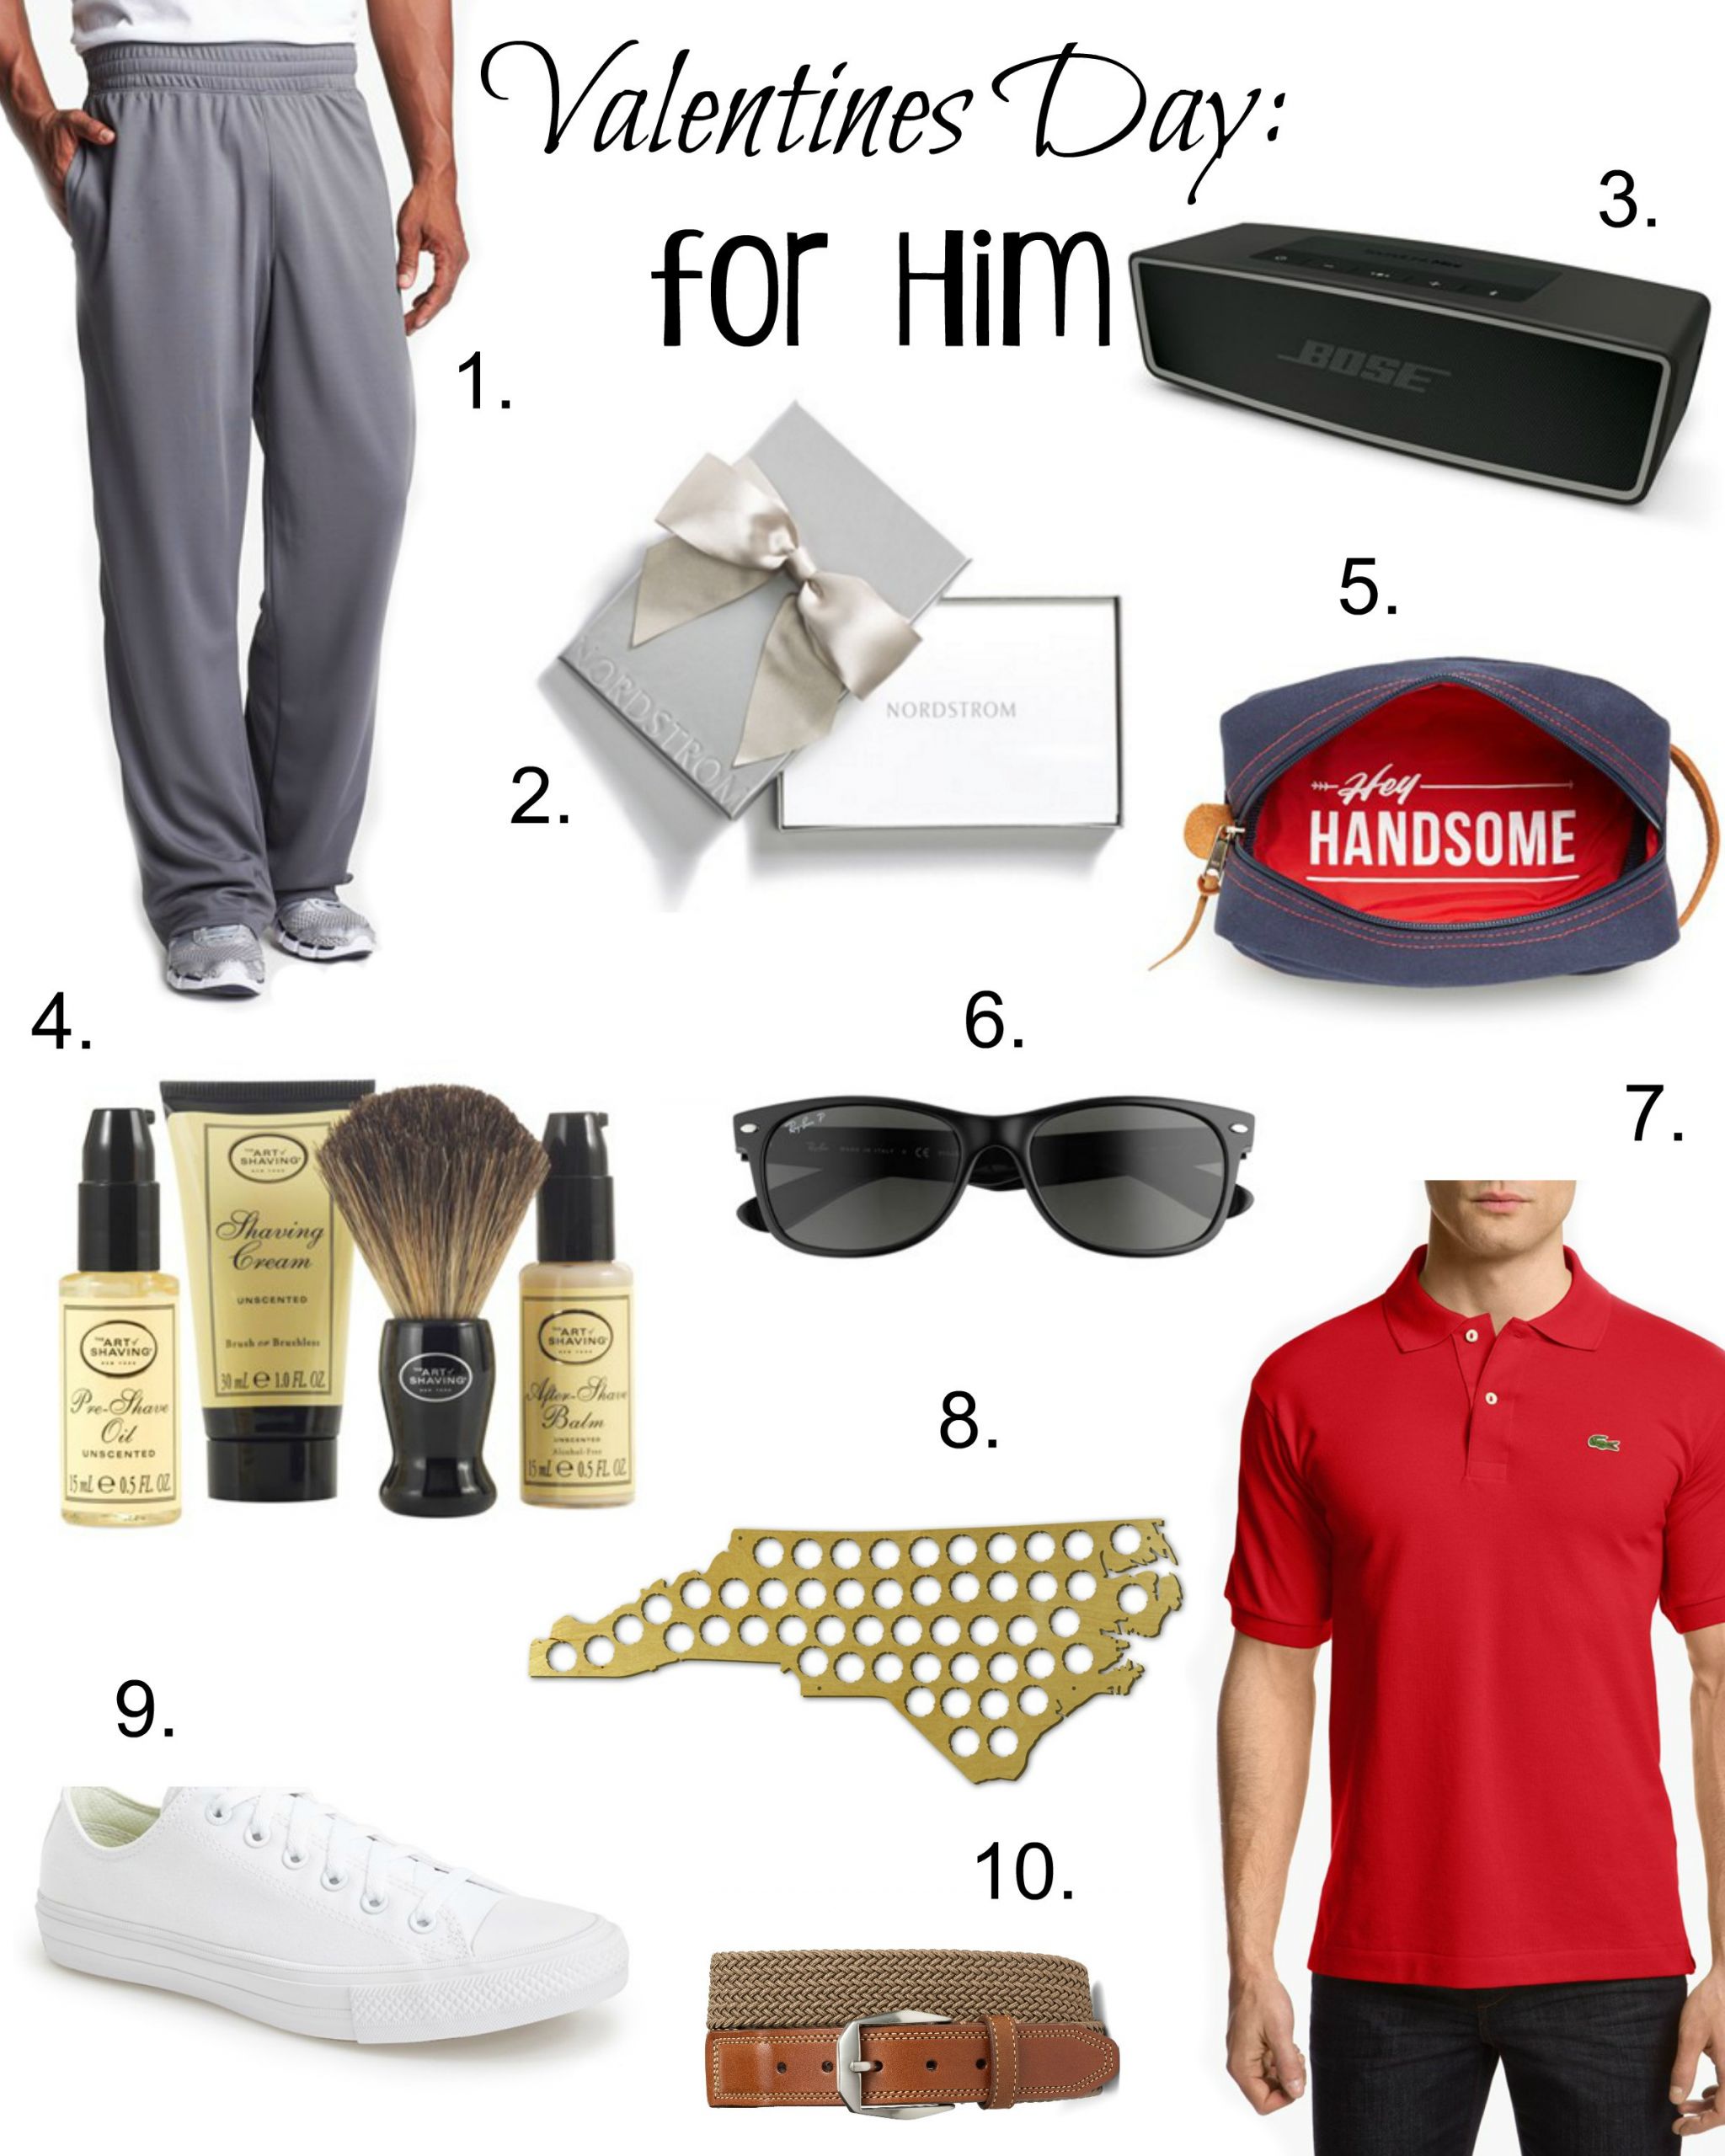 Best Valentines Day Gifts for Him Awesome top 10 Valentines Day Gifts for Him